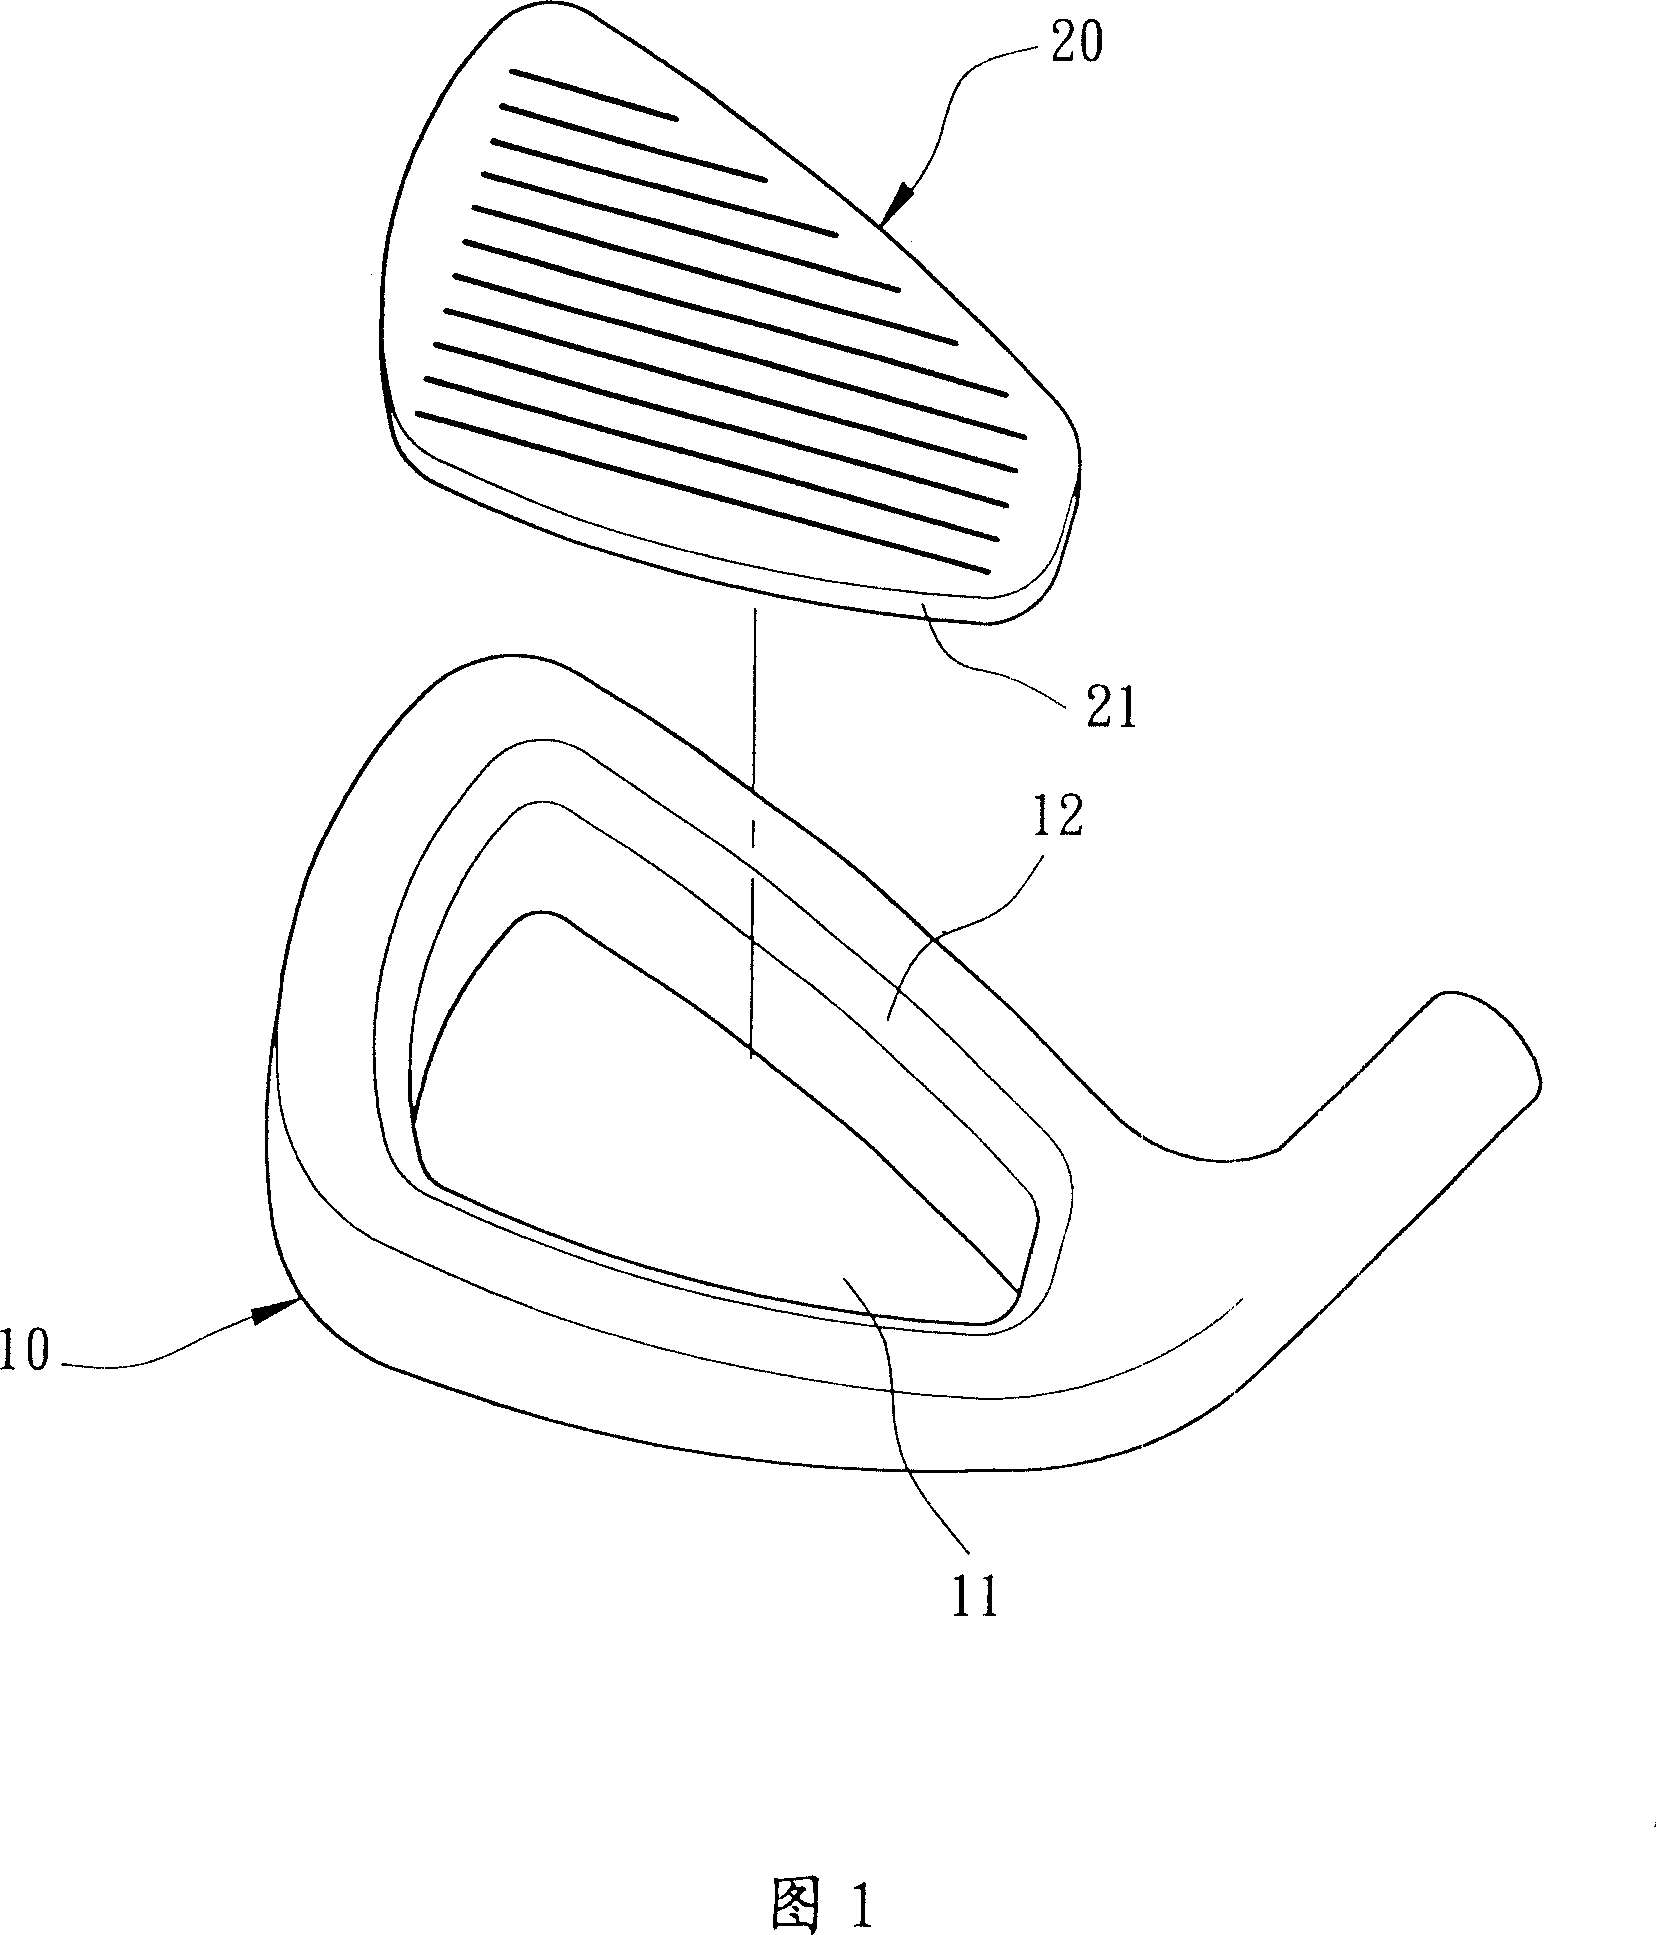 Golf rod head having joint portion and material filling space